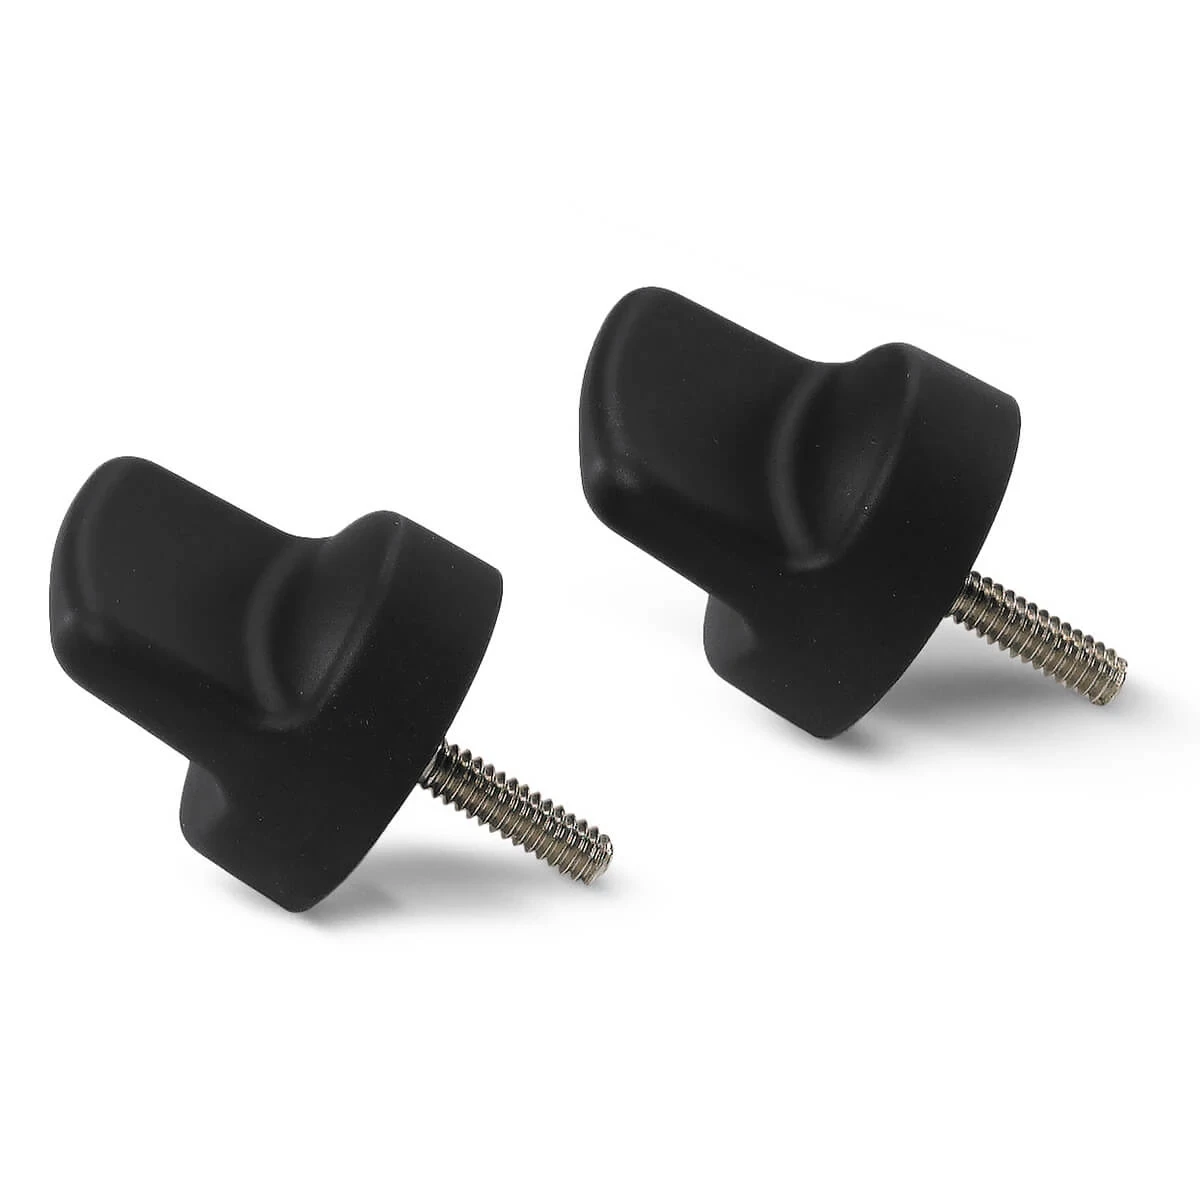 Pair of HELIX 8-12 Mounting Knobs